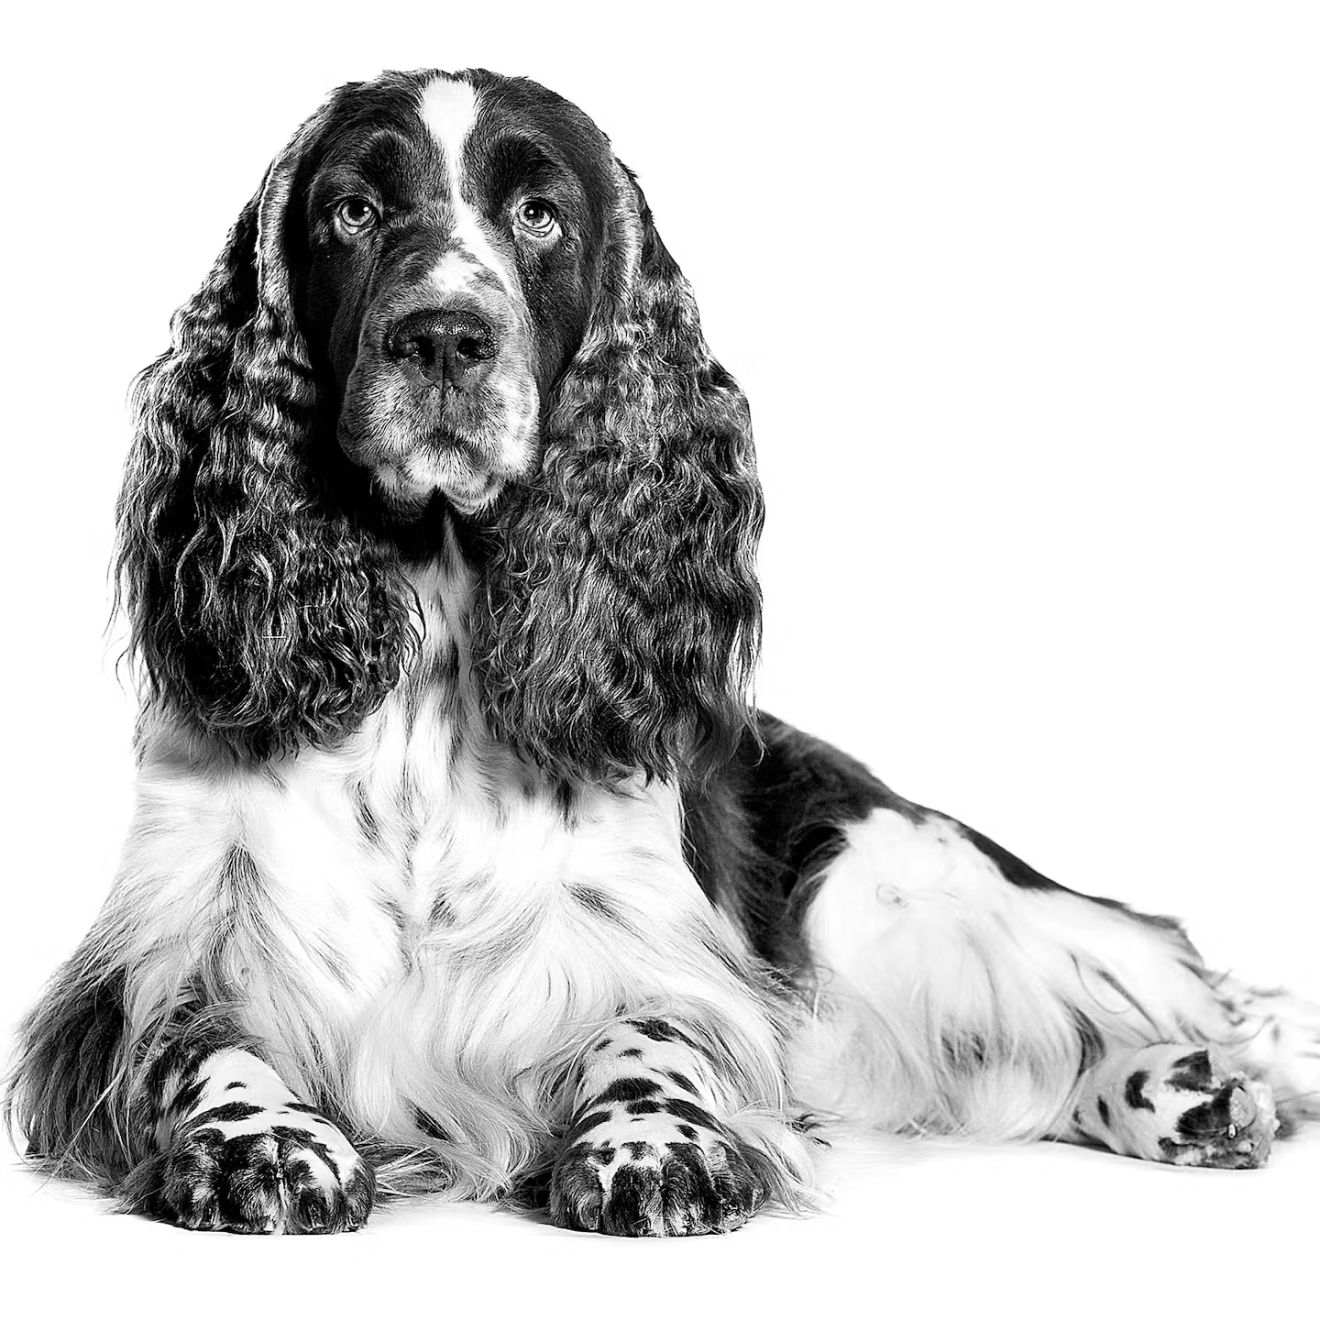 English Springer Spaniel adult lying down in black and white on a white background